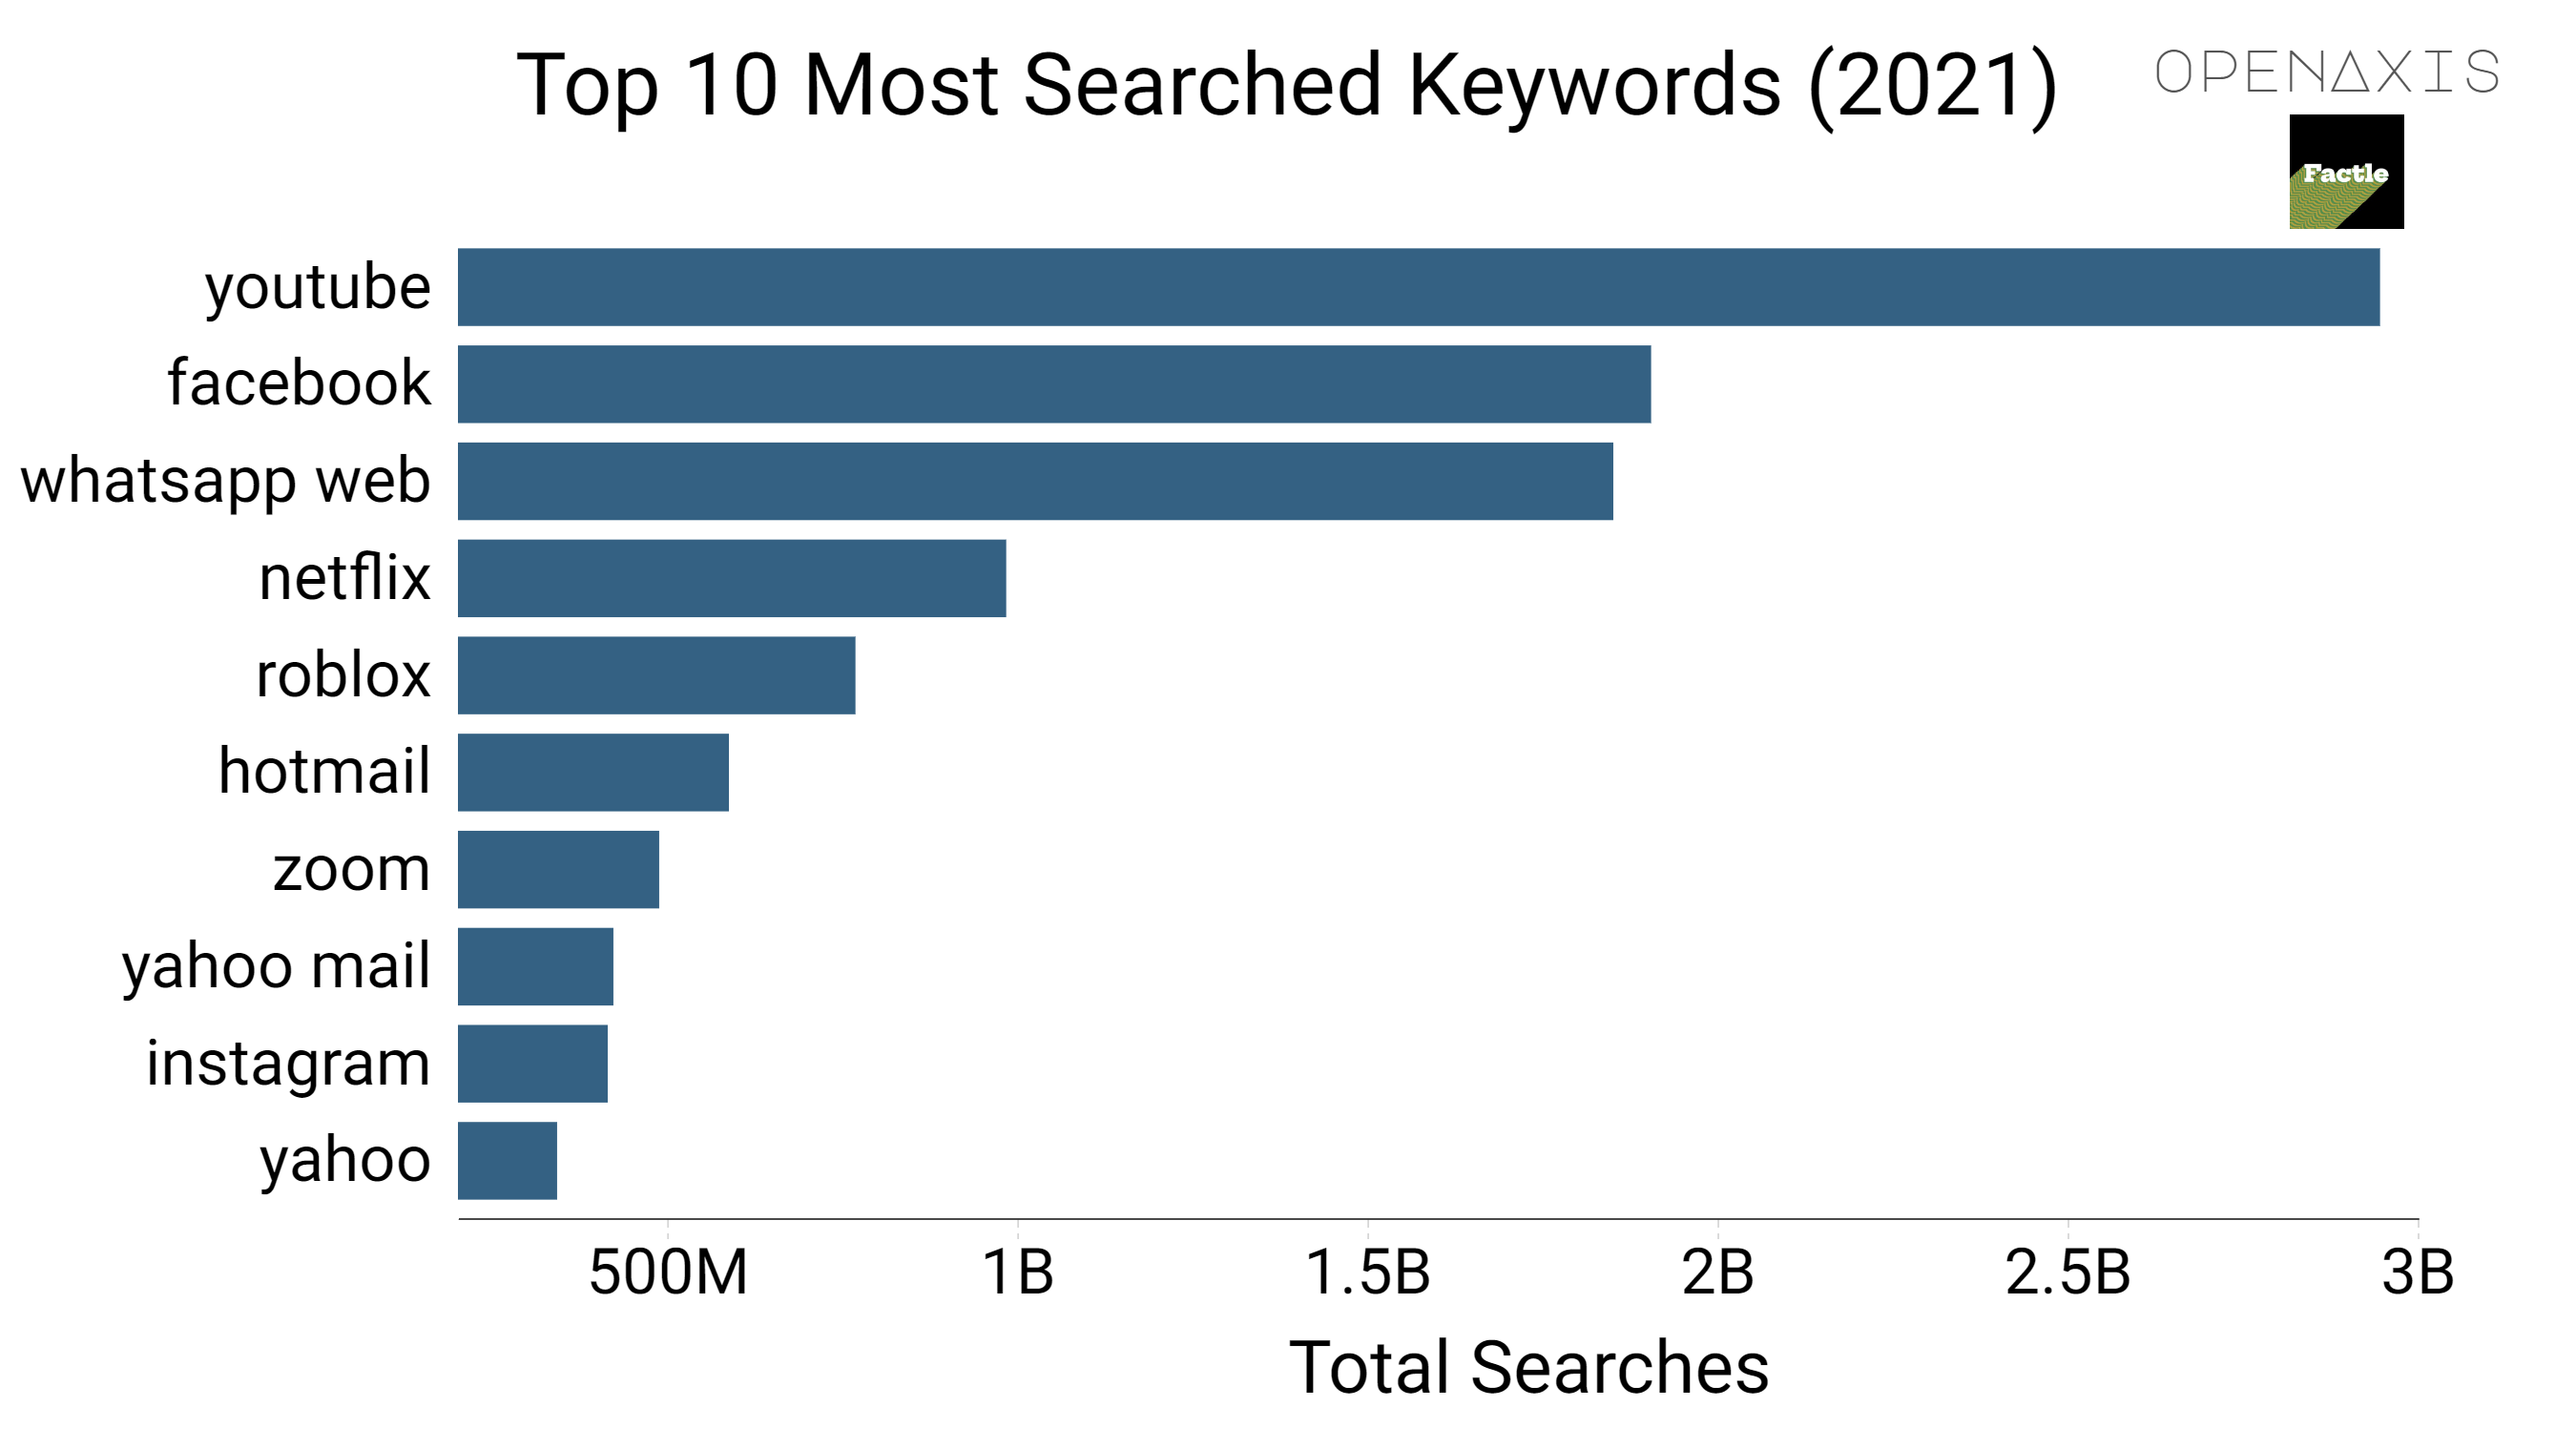 <p>Some of the top most searched keywords worldwide over 2021 won’t come as any surprise. “Youtube”, “facebook”, and “whatsapp web” took the top spots with netflix.com as the runner-up.</p><p><br /></p><p>﻿<a href="http:///search?q=%23search" target="_blank">#search</a>﻿ ﻿<a href="http:///search?q=%23keywords" target="_blank">#keywords</a>﻿ ﻿<a href="http:///search?q=%23trending" target="_blank">#trending</a>﻿ </p><p><br /></p><p>Source: <a href="https://app.openaxis.com/data/3767" target="_blank">Google Trends, SimilarWeb</a></p><p><br /></p>